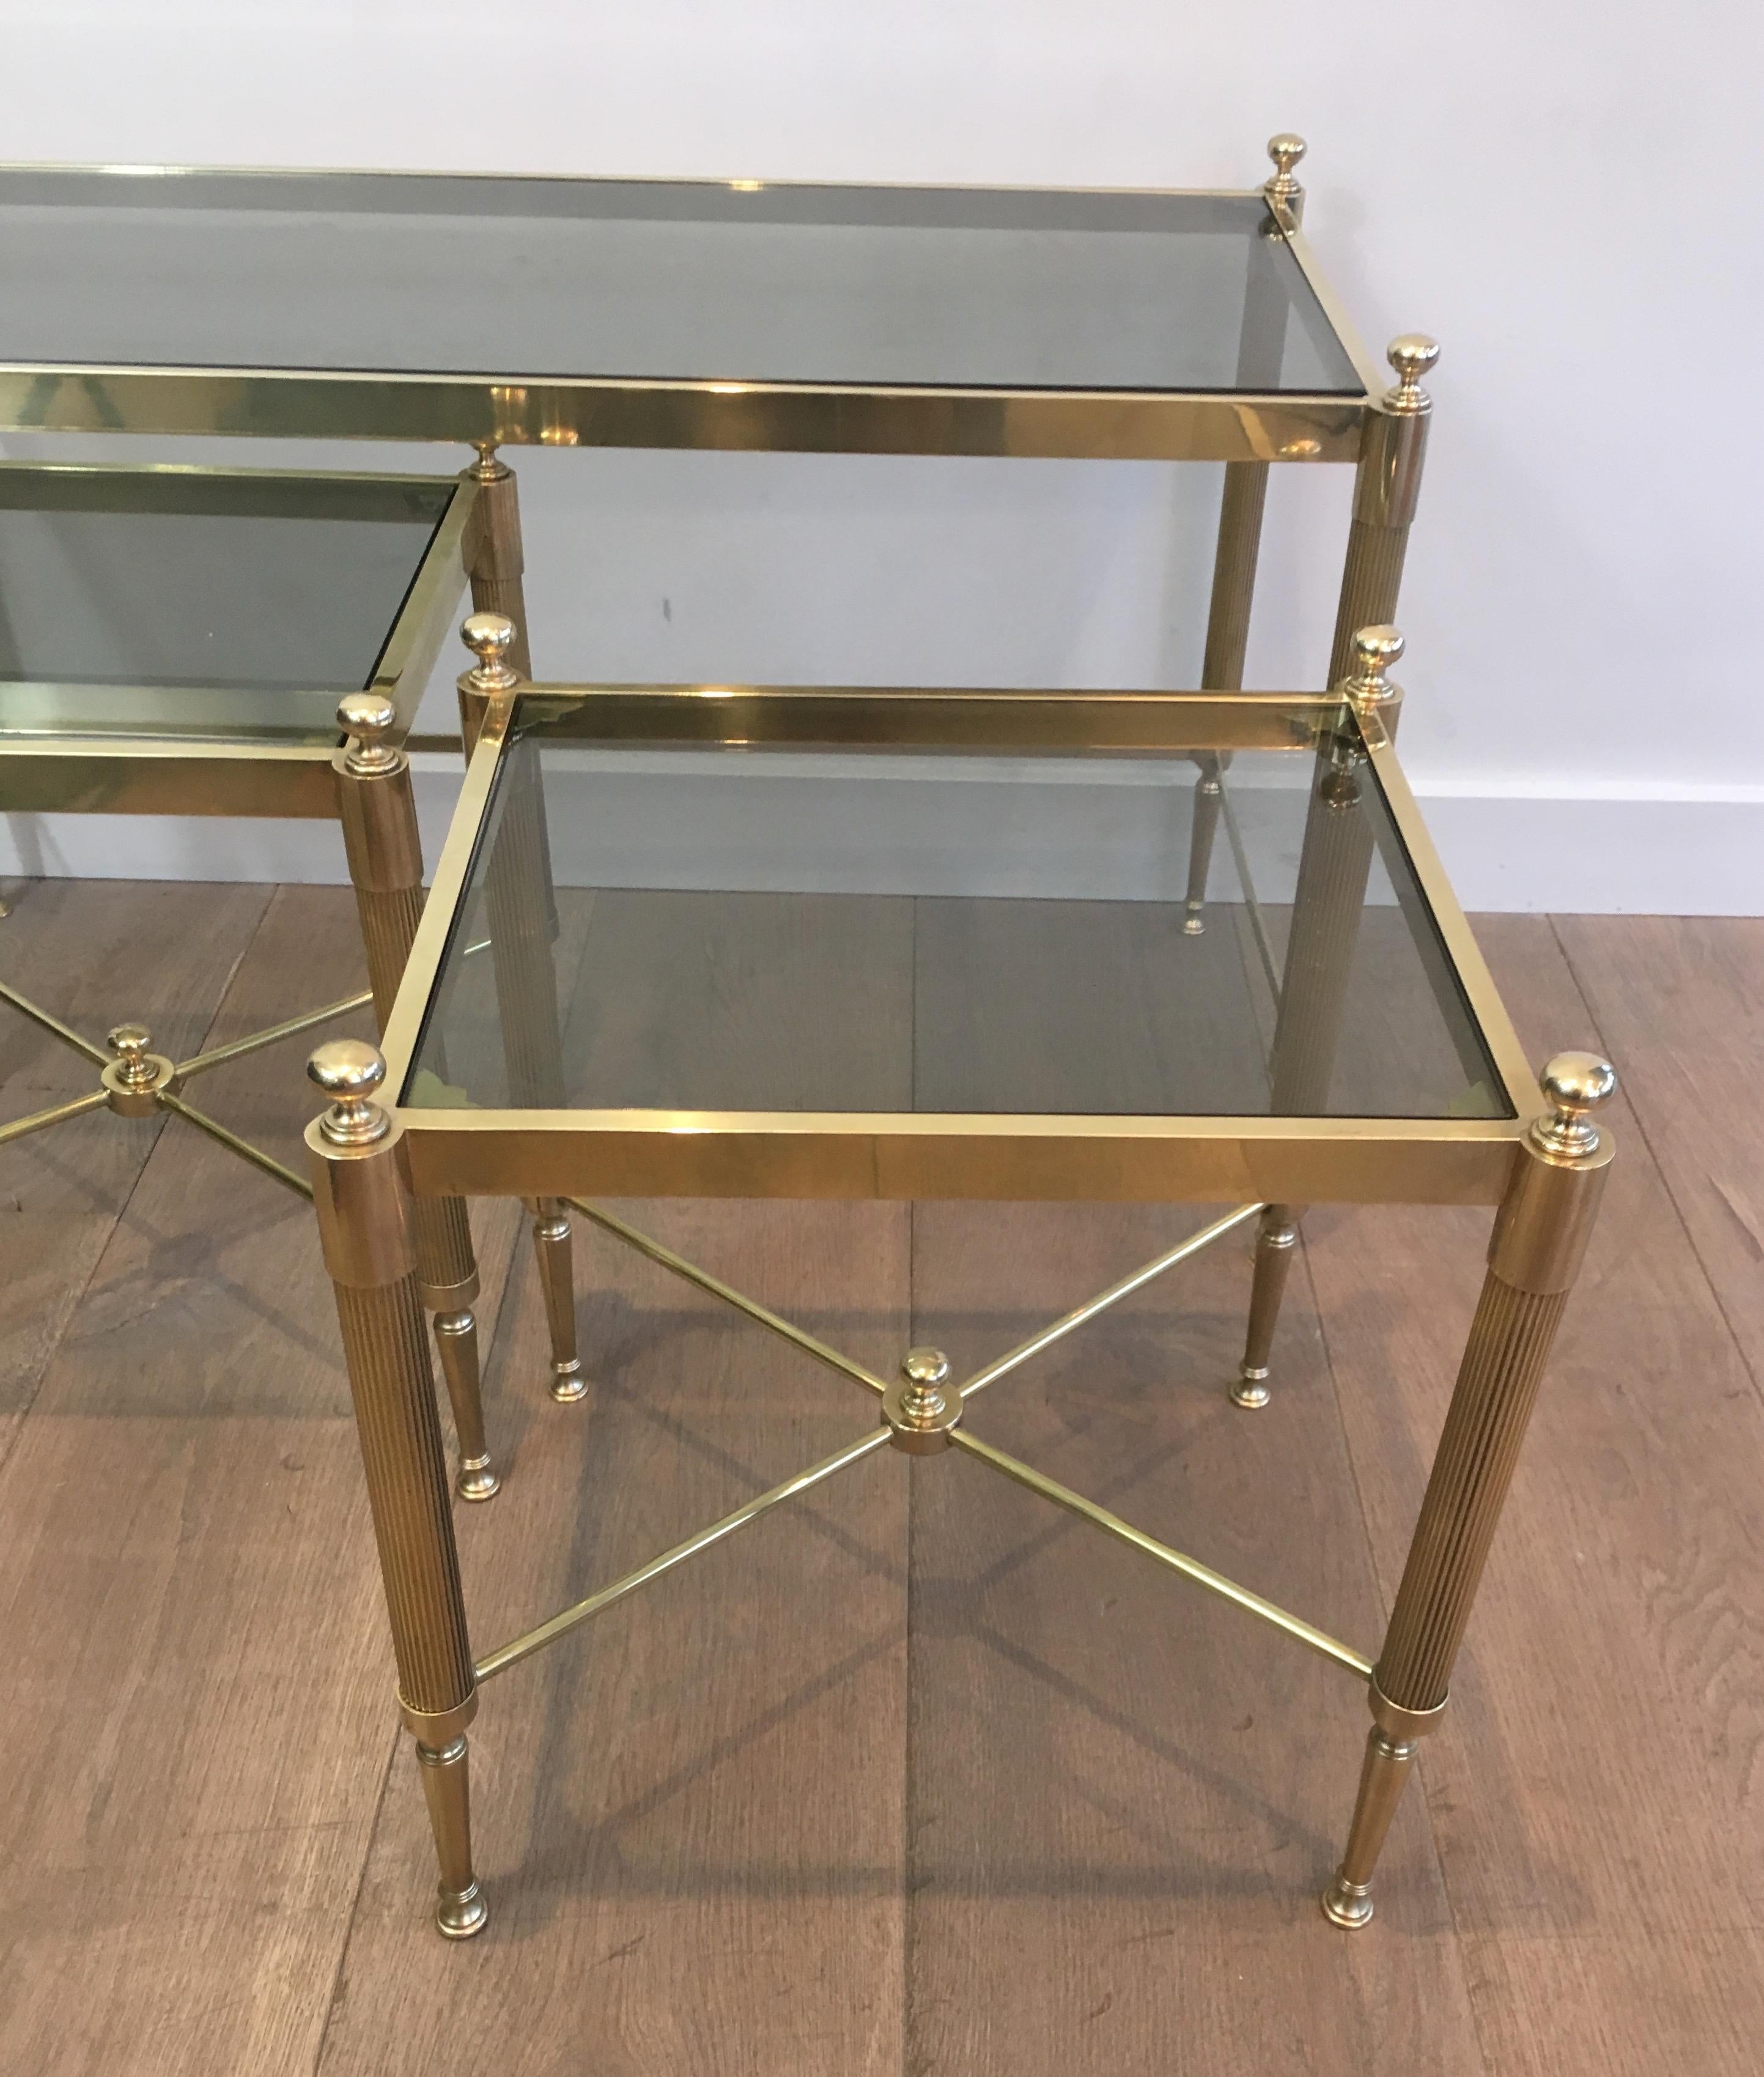 Late 20th Century Tripartite Brass Coffee Table made of a Main Table and 2 Nesting Side Tables